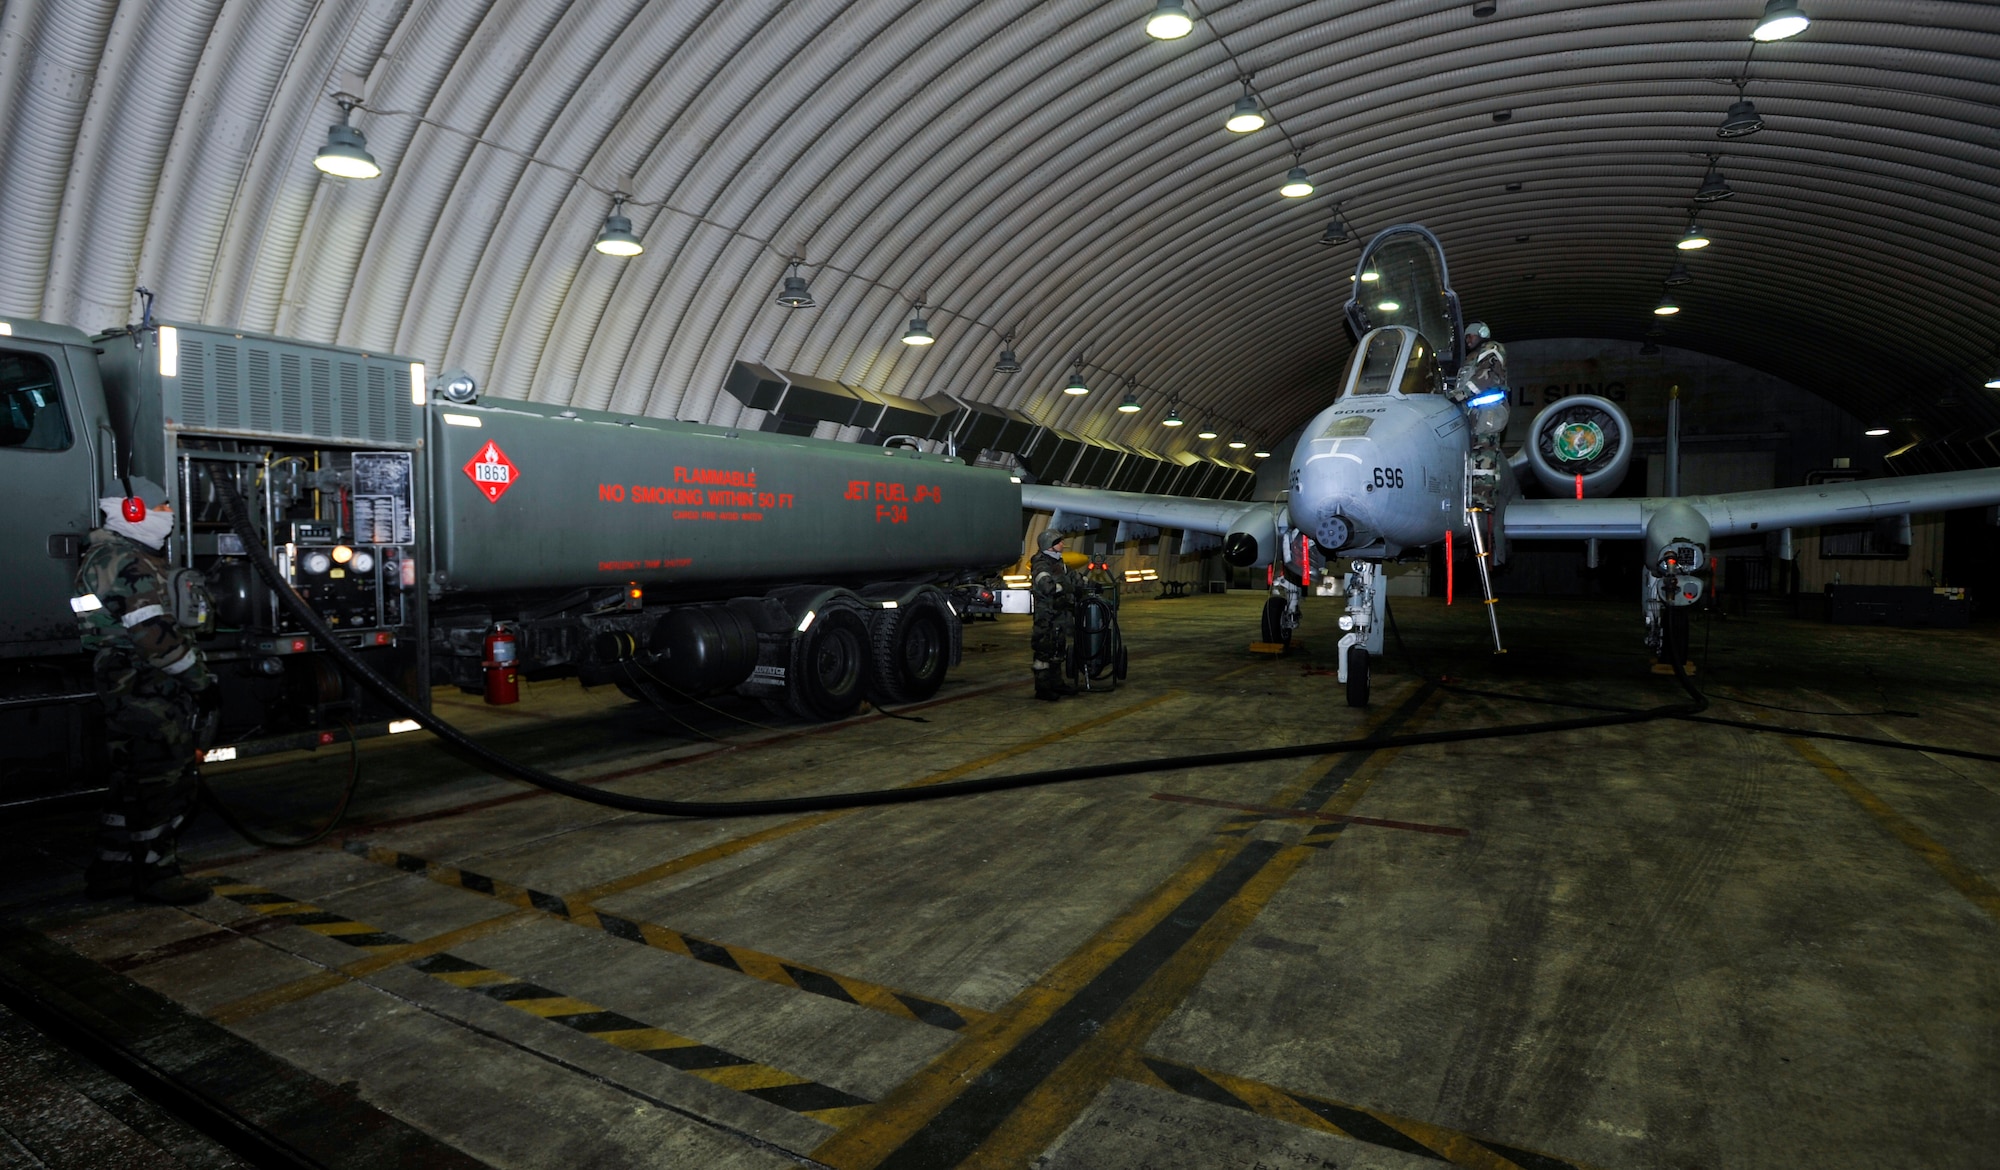 Airmen load fuel into an A10 Thunderbolt II prior to being prepped for launch Dec. 5, 2014, during Exercise Beverly Bulldog 15-01 at Osan Air Base, Republic of Korea. The exercise focuses on readiness, testing Osan’s wartime procedures, and realistically looking at our ability to defend the base, execute operations and receive follow-on forces. (U.S. Air Force photo by Senior Airman David Owsianka)